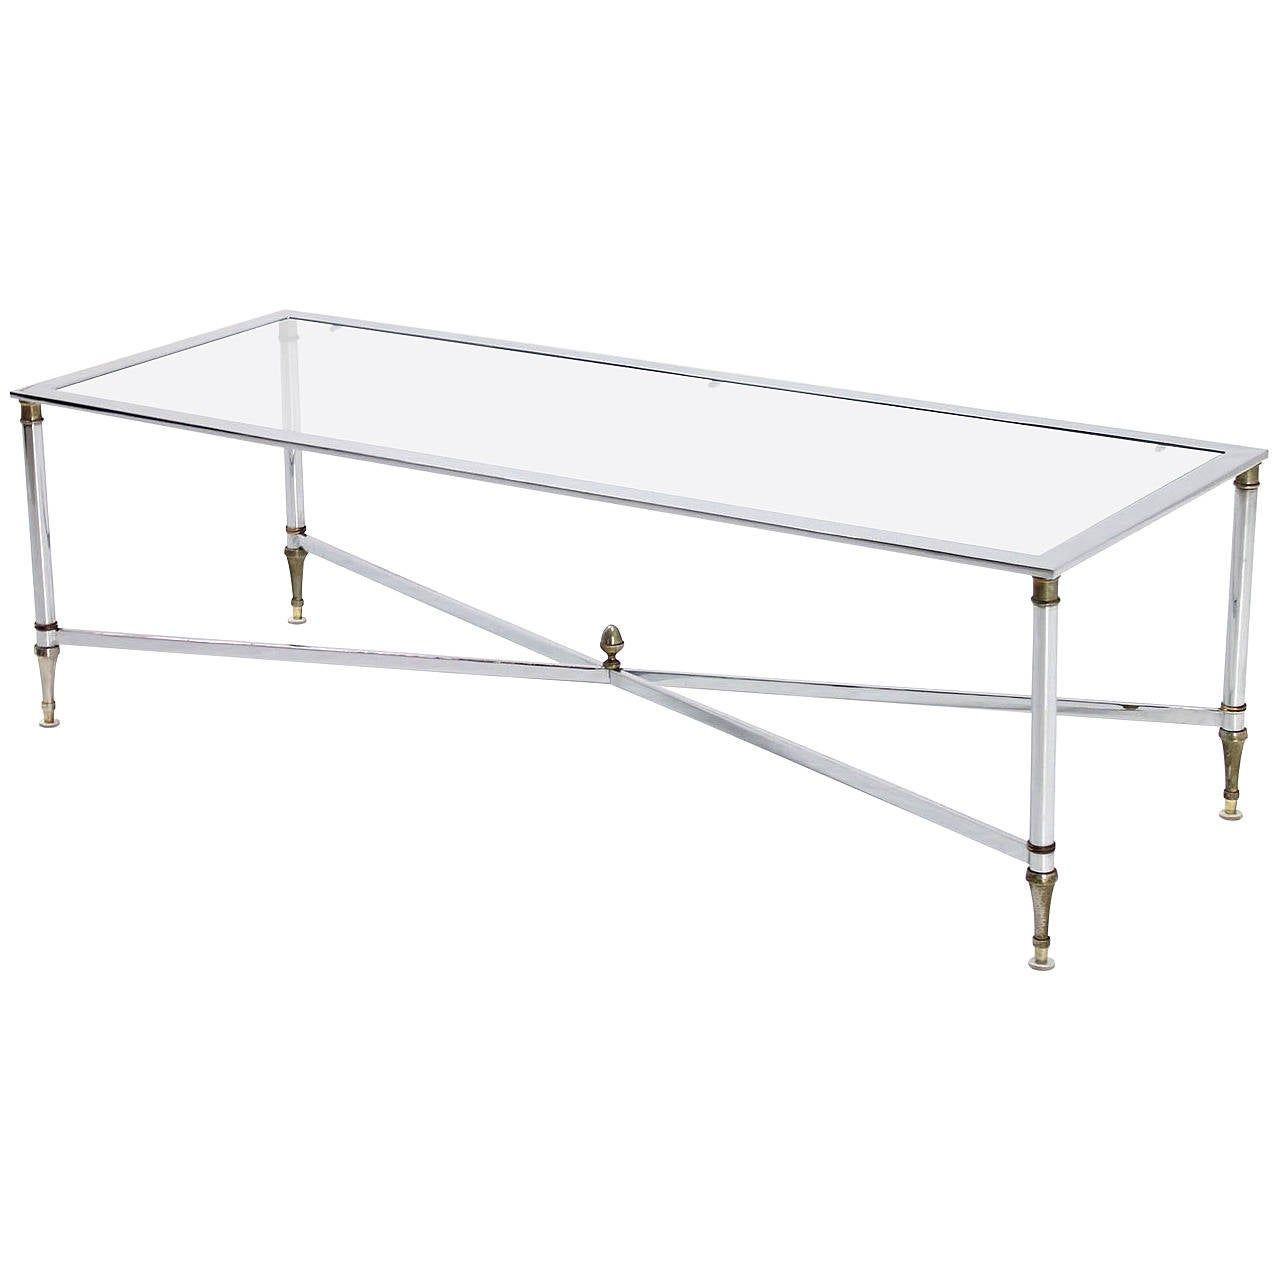 Chrome And Glass Rectangular Coffee Tables Inside Most Up To Date Chrome Brass X Base Glass Top Long Rectangle Coffee Table (View 19 of 20)